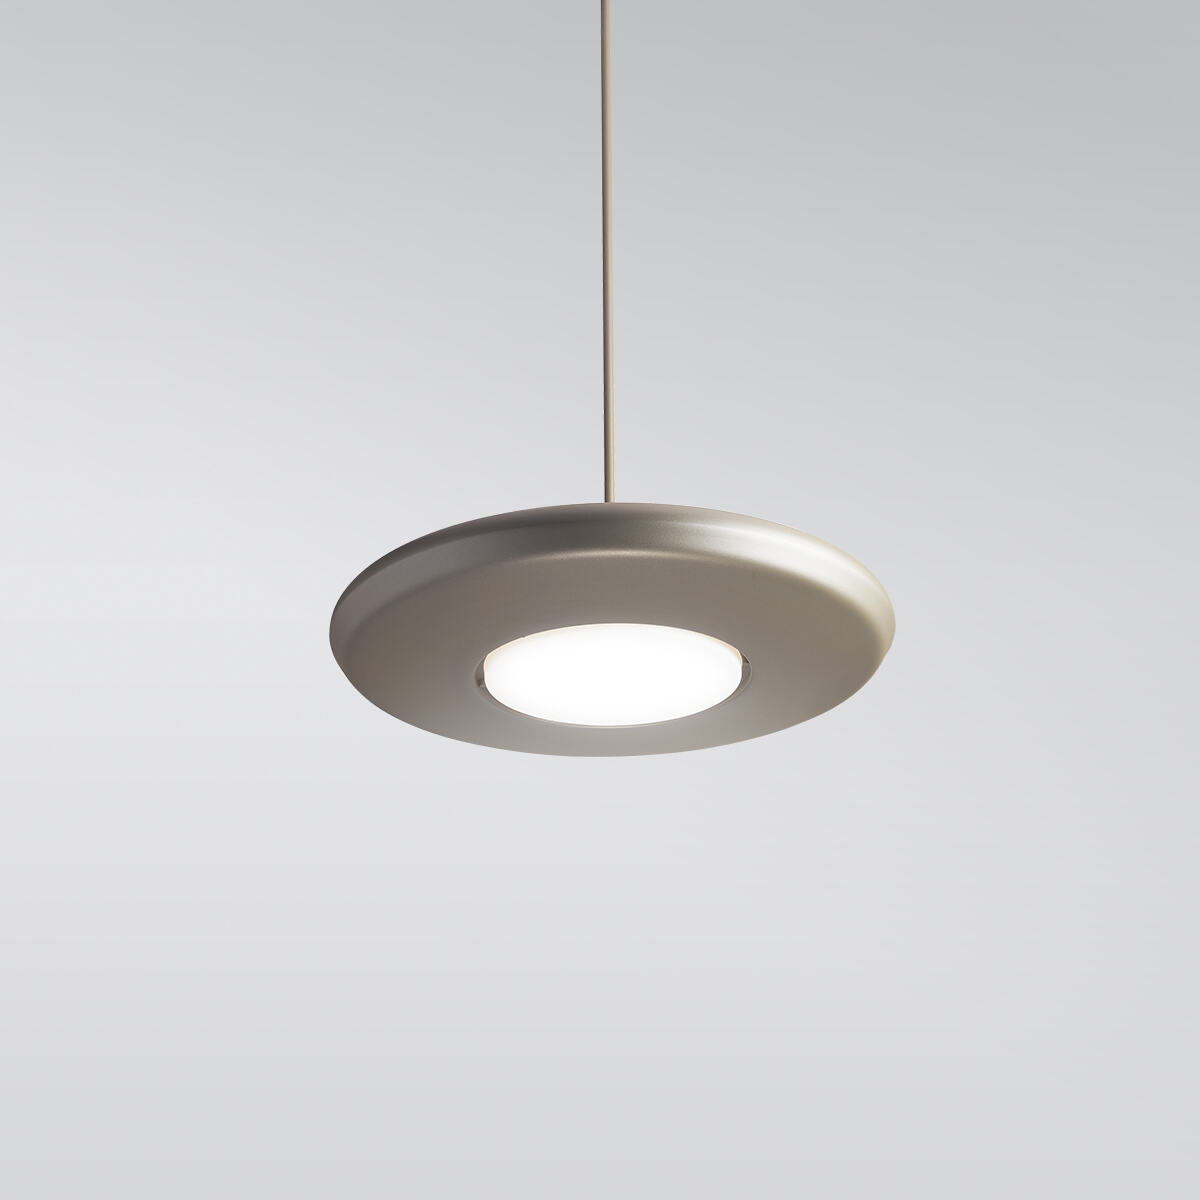 CP4450 Aries A round, disc-shaped pendant with a luminous downlight diffuser in the center